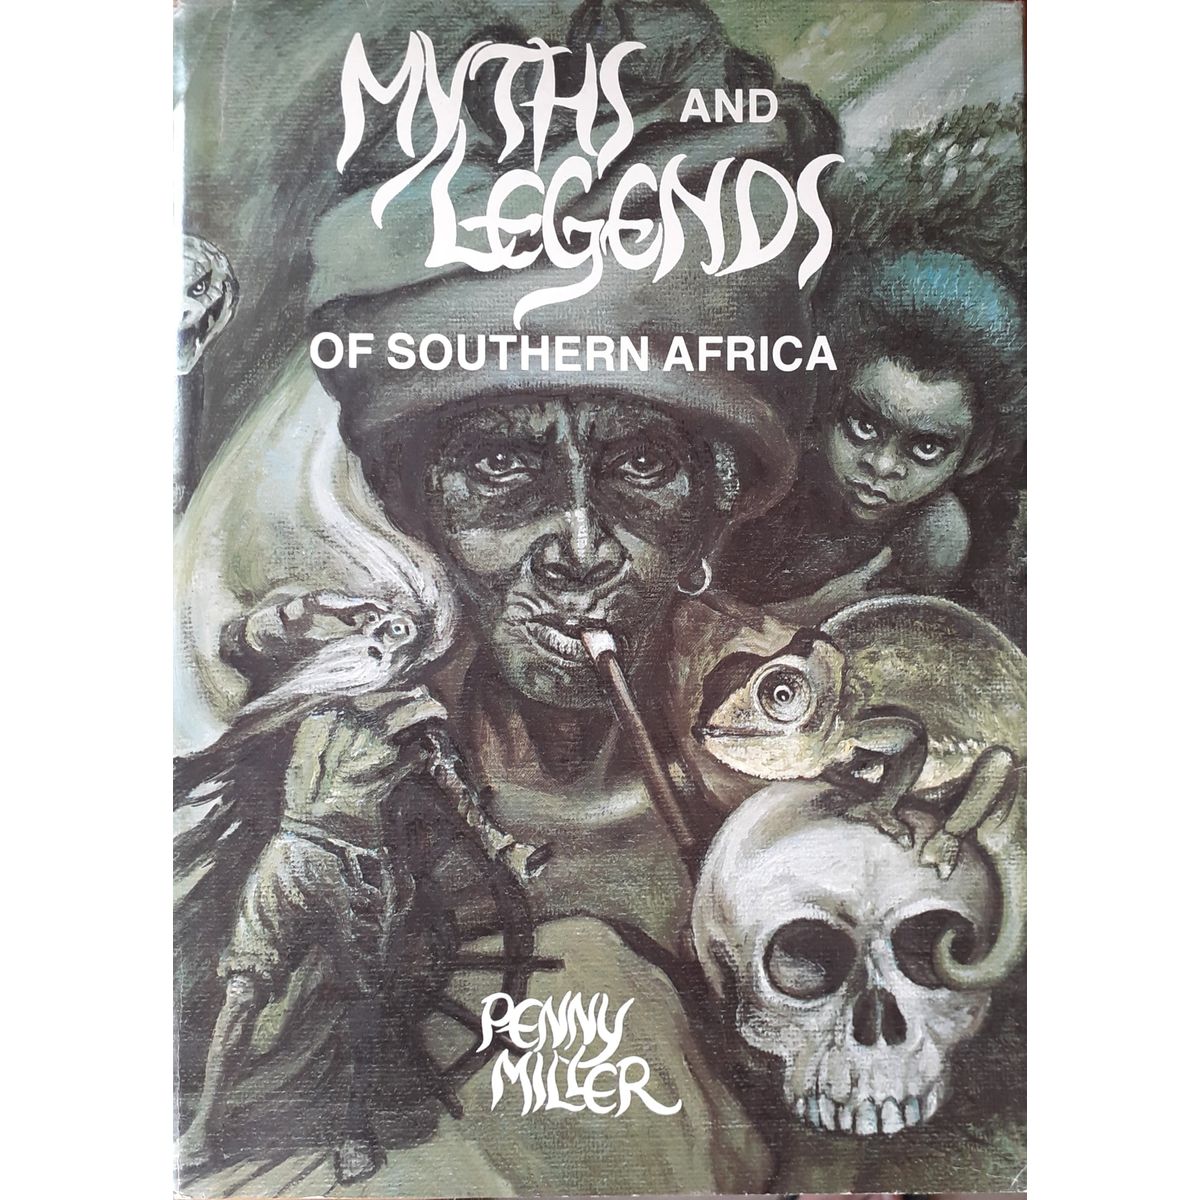 ISBN: 9780949956163 / 0949956163 - Myths and Legends of Southern Africa by Penny Miller, introduction by T.V. Bulpin, edited by Rosemund Handler [1979]